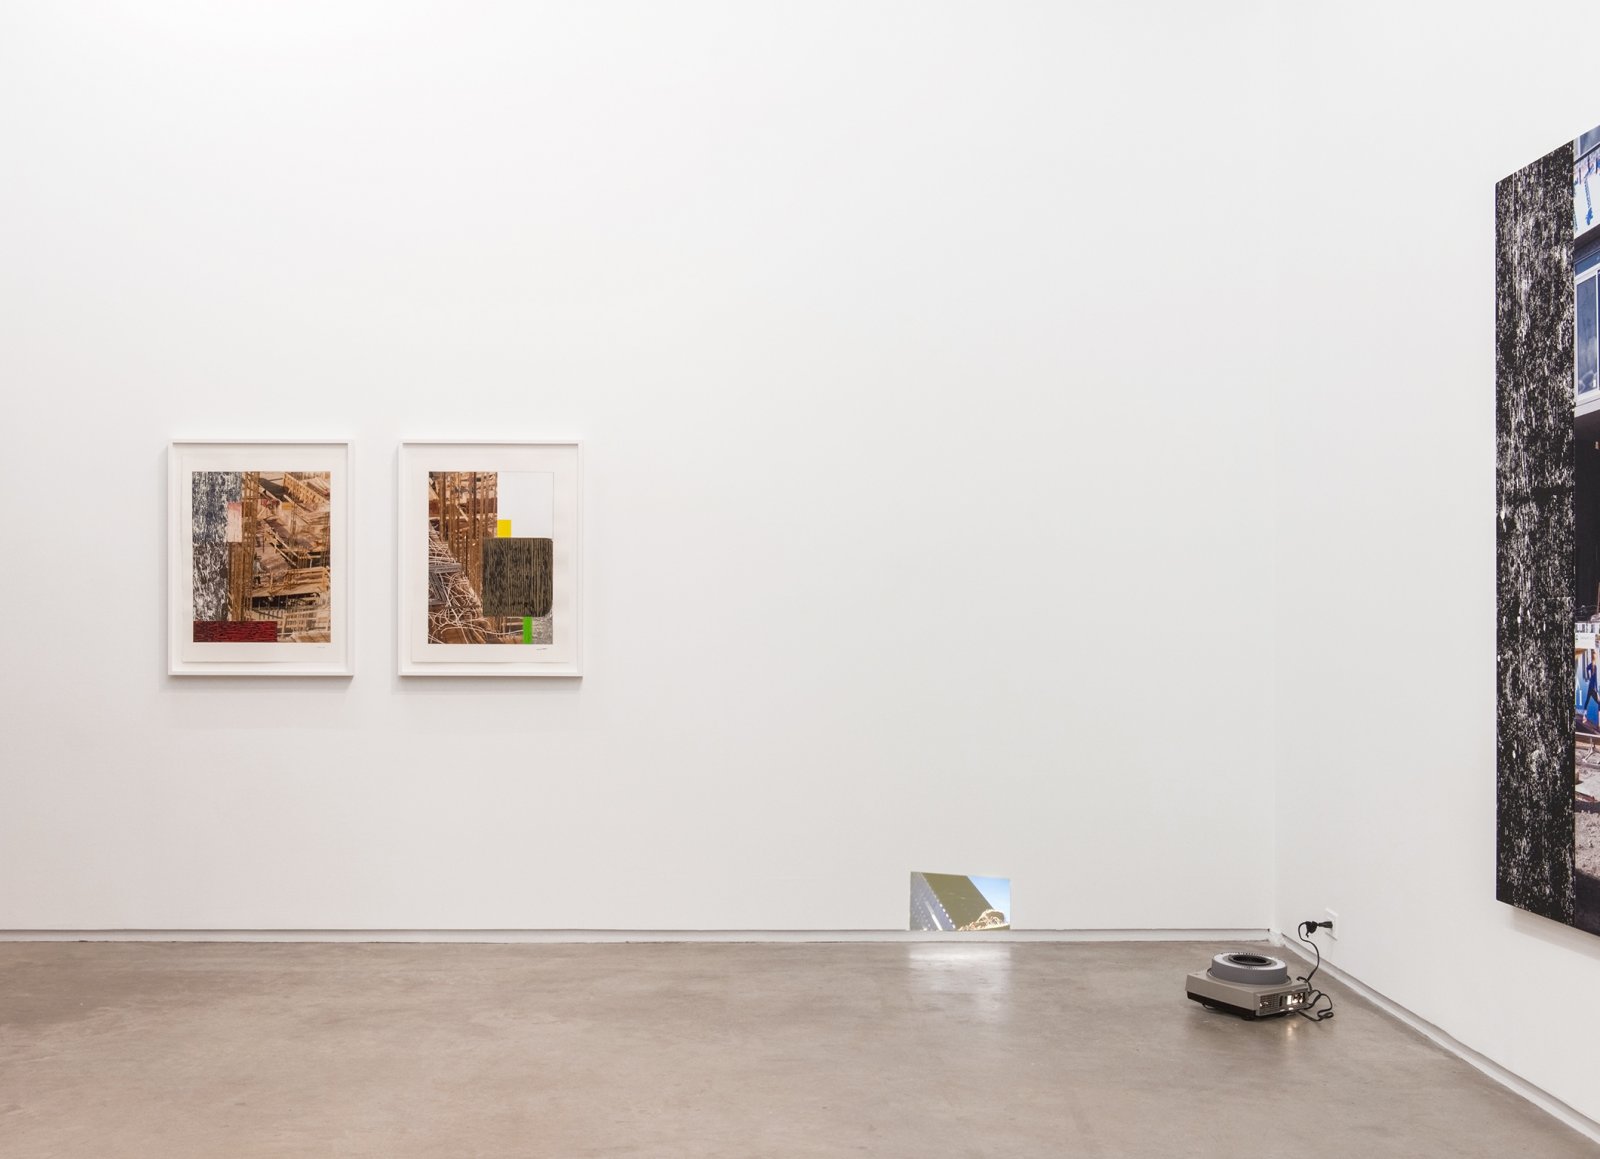 Ian Wallace, installation view, The Construction Site, Catriona Jeffries, 2015​​ by Ian Wallace